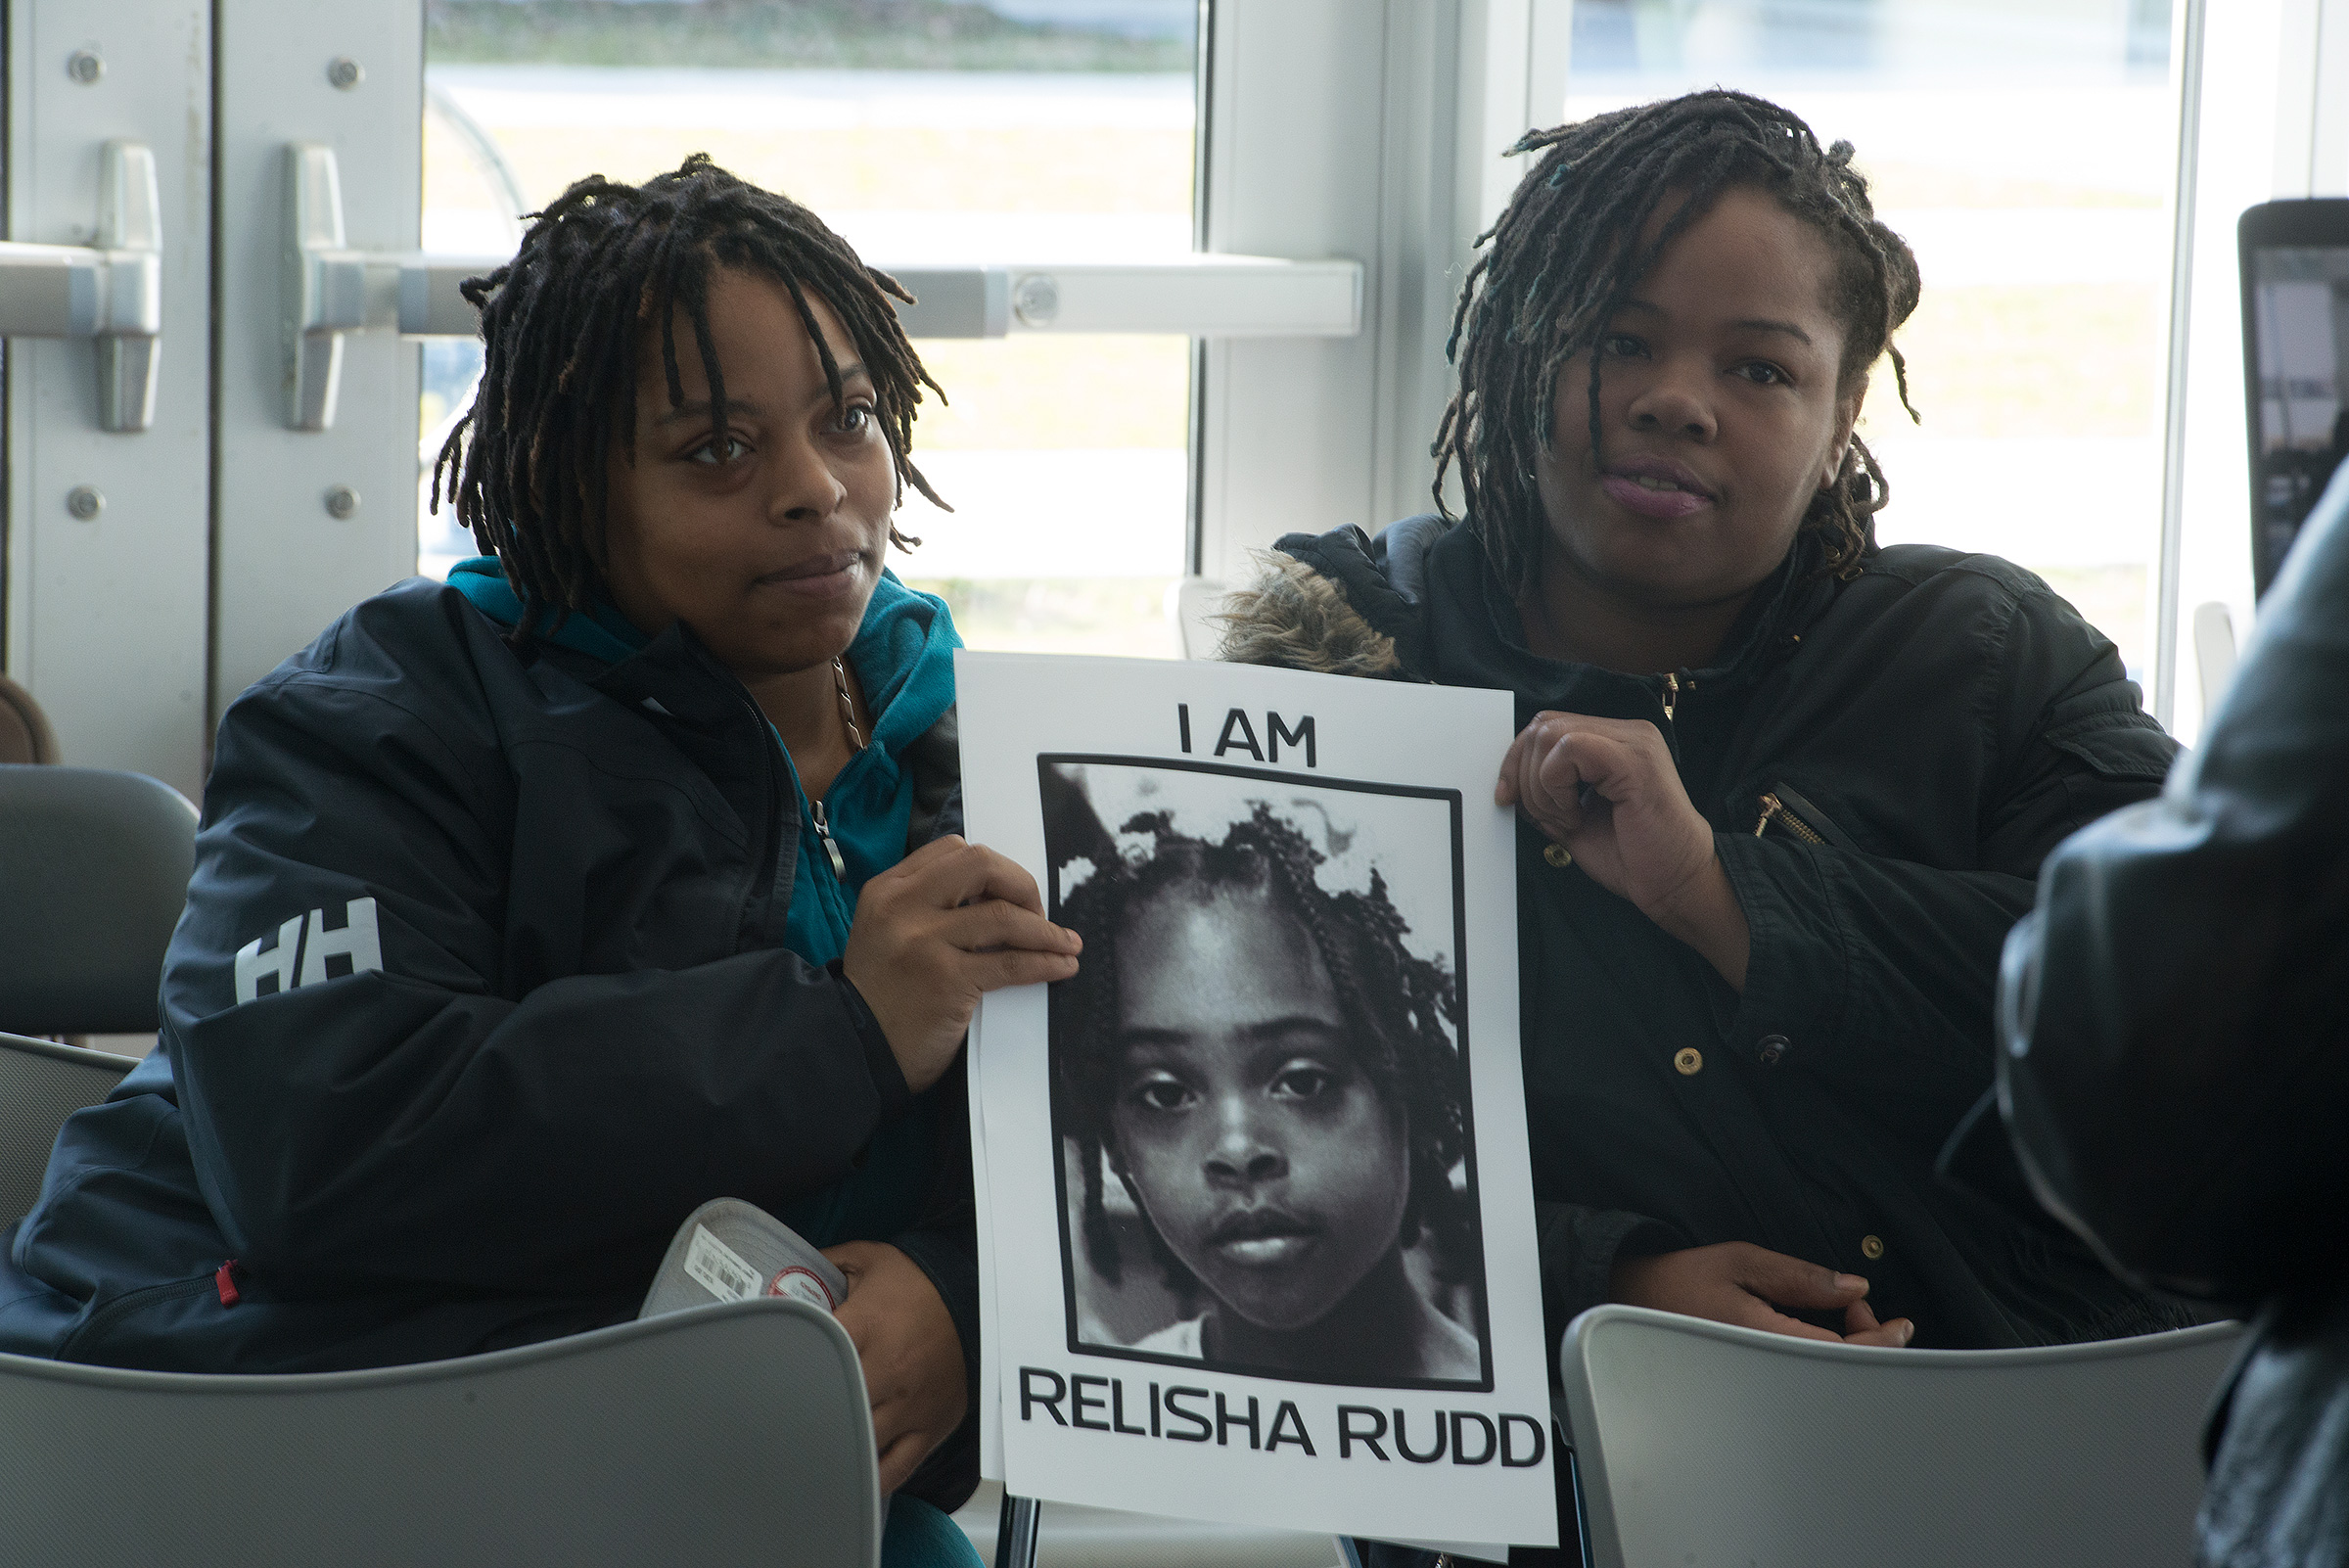 Shamika Young, left, Relisha's mother, and Shamika's god sister Kinnicia Williams attend a remembrance celebration of Relisha Rudd at the Deanwood Recreation Center in Washington, D.C. on Feb. 27, 2016.